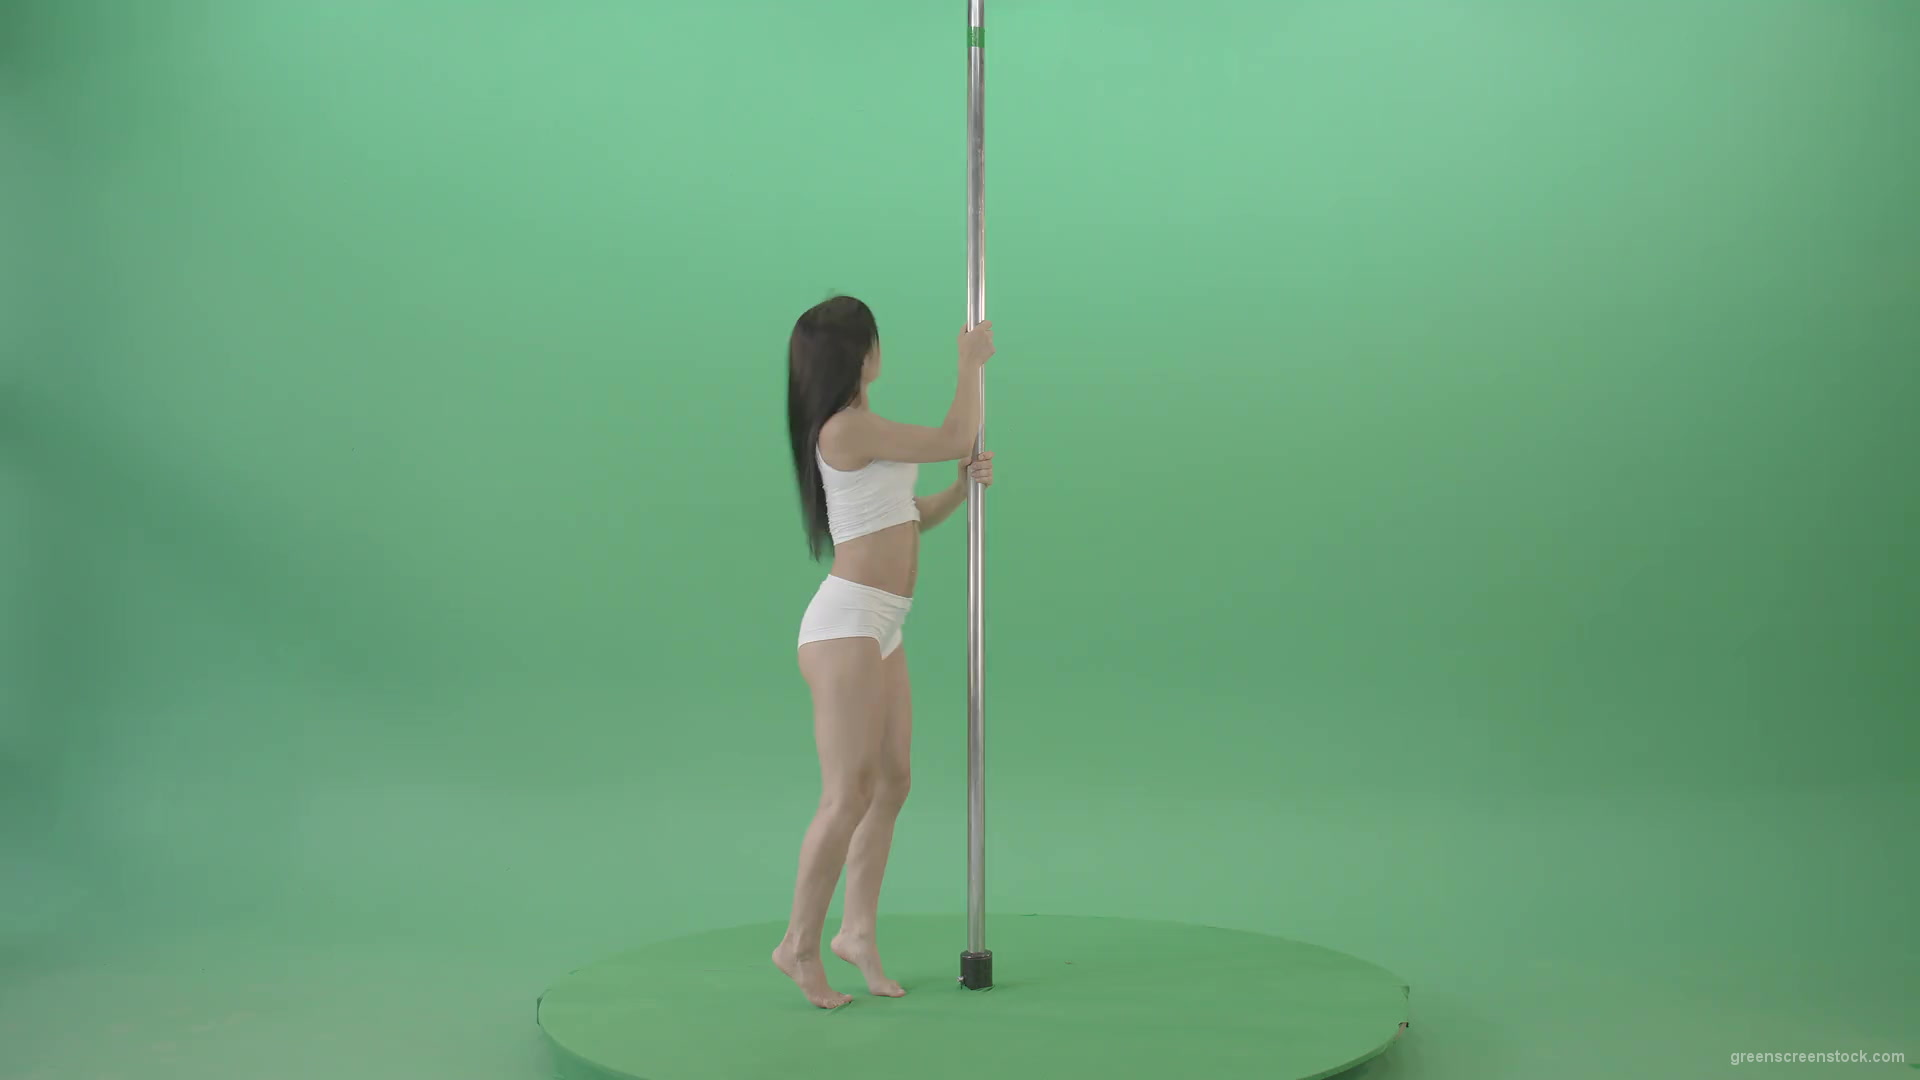 Sexy-moves-by-pole-dance-girl-dancing-on-green-screen-Video-Footage-1920_001 Green Screen Stock